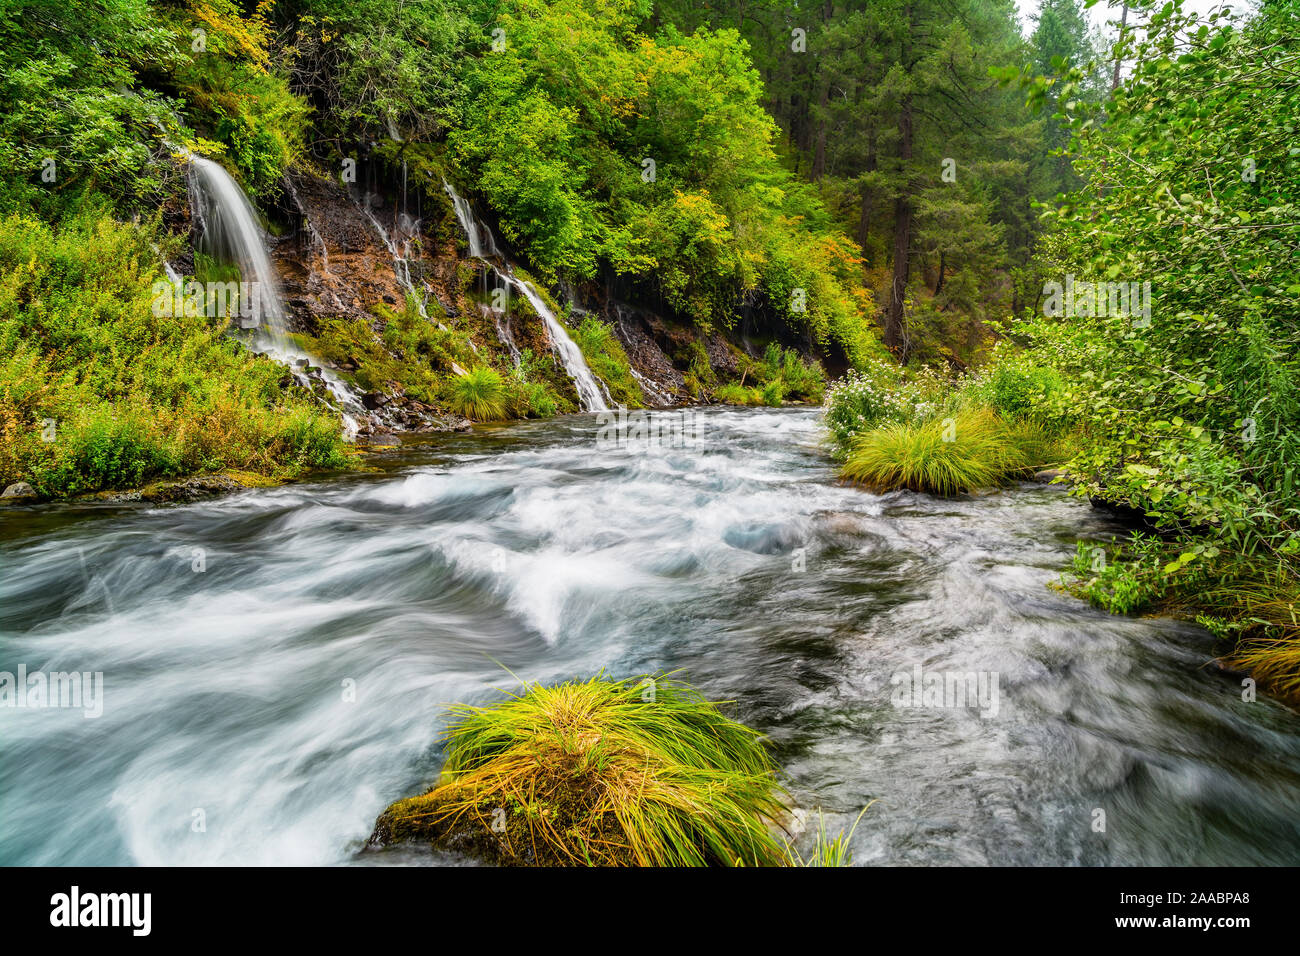 Waterfalls in the serene forest Stock Photo